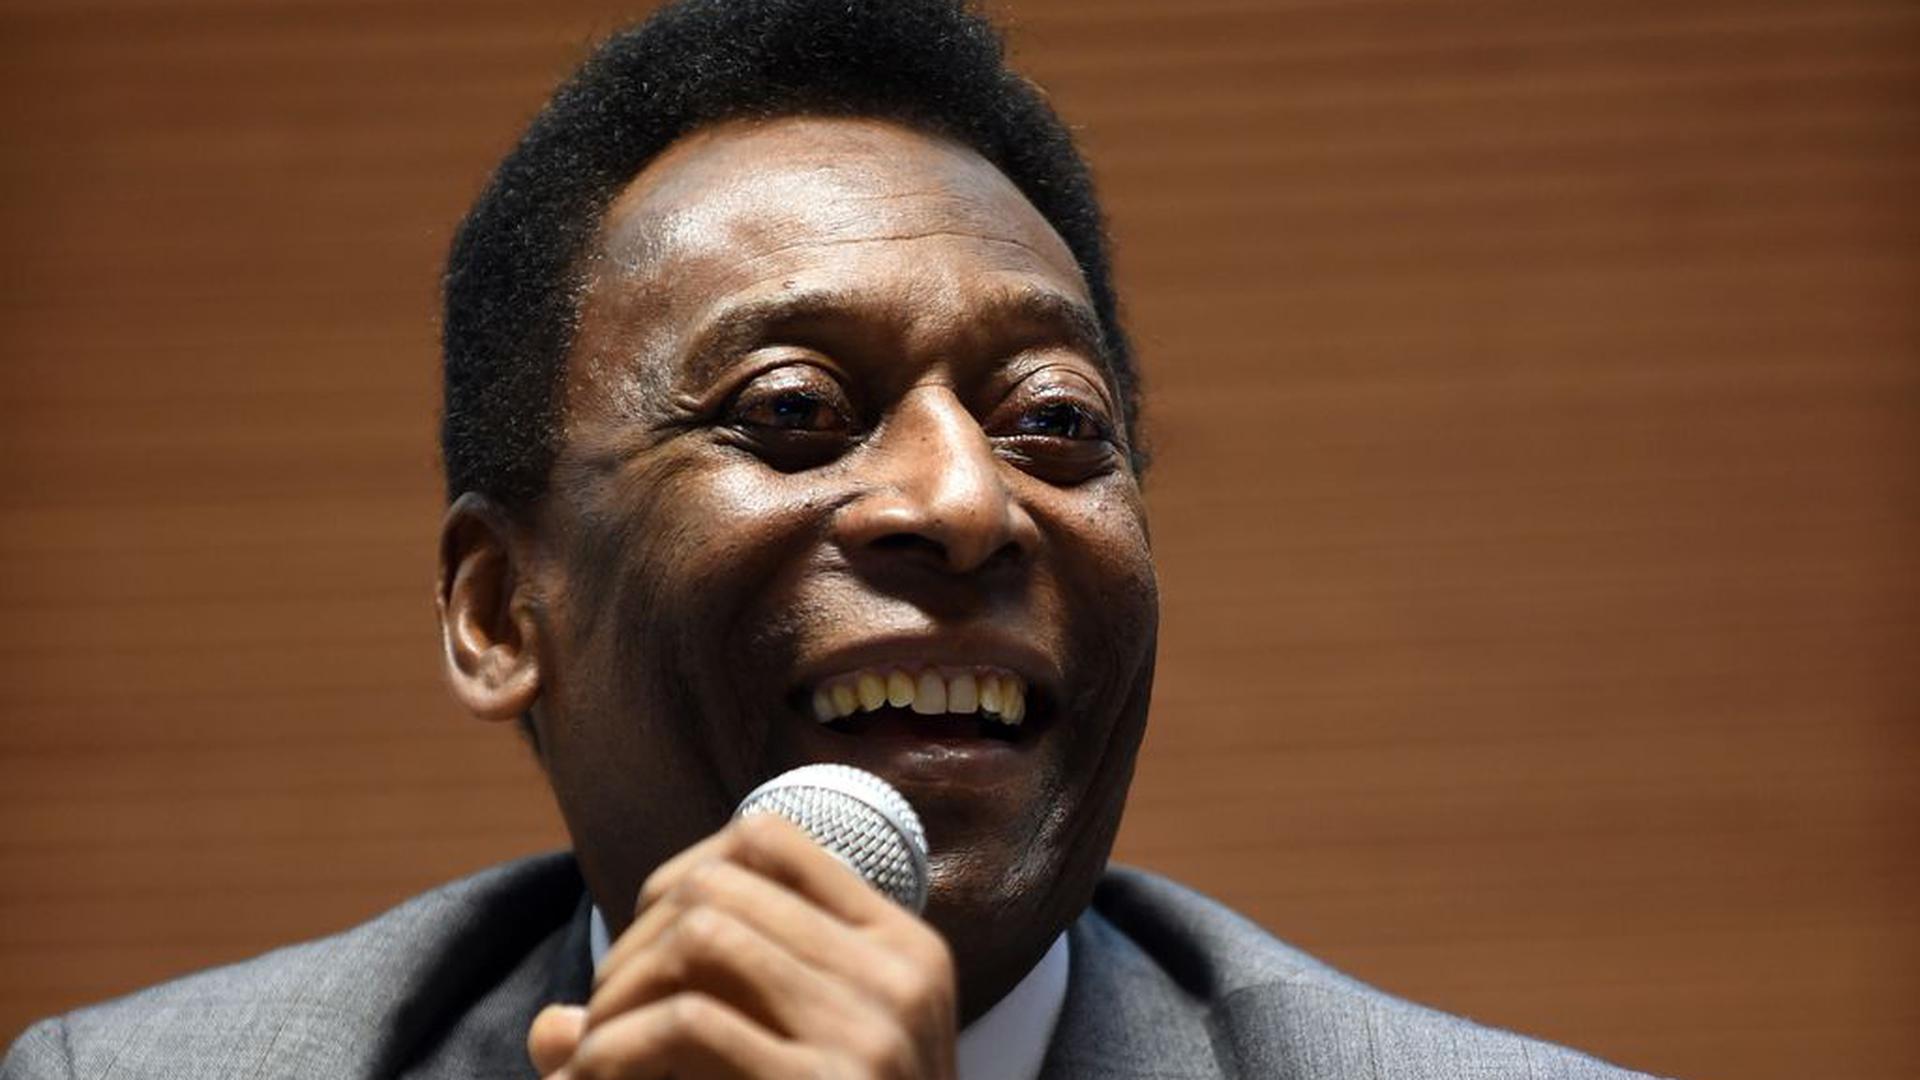 Brazilian football star Pele (R) speaks during the launch of the Portuguese version of The Better Life Index developed by The Organisation for Economic Co-operation and Development (OECD) in Sao Paulo, Brazil, on June 9, 2014 prior to the star of the FIFA 2014 World Cup. The Index allows to compare well-being across countries, based on 11 topics the OECD has identified as essential, in the areas of material living conditions and quality of life. AFP PHOTO/EITAN ABRAMOVICH